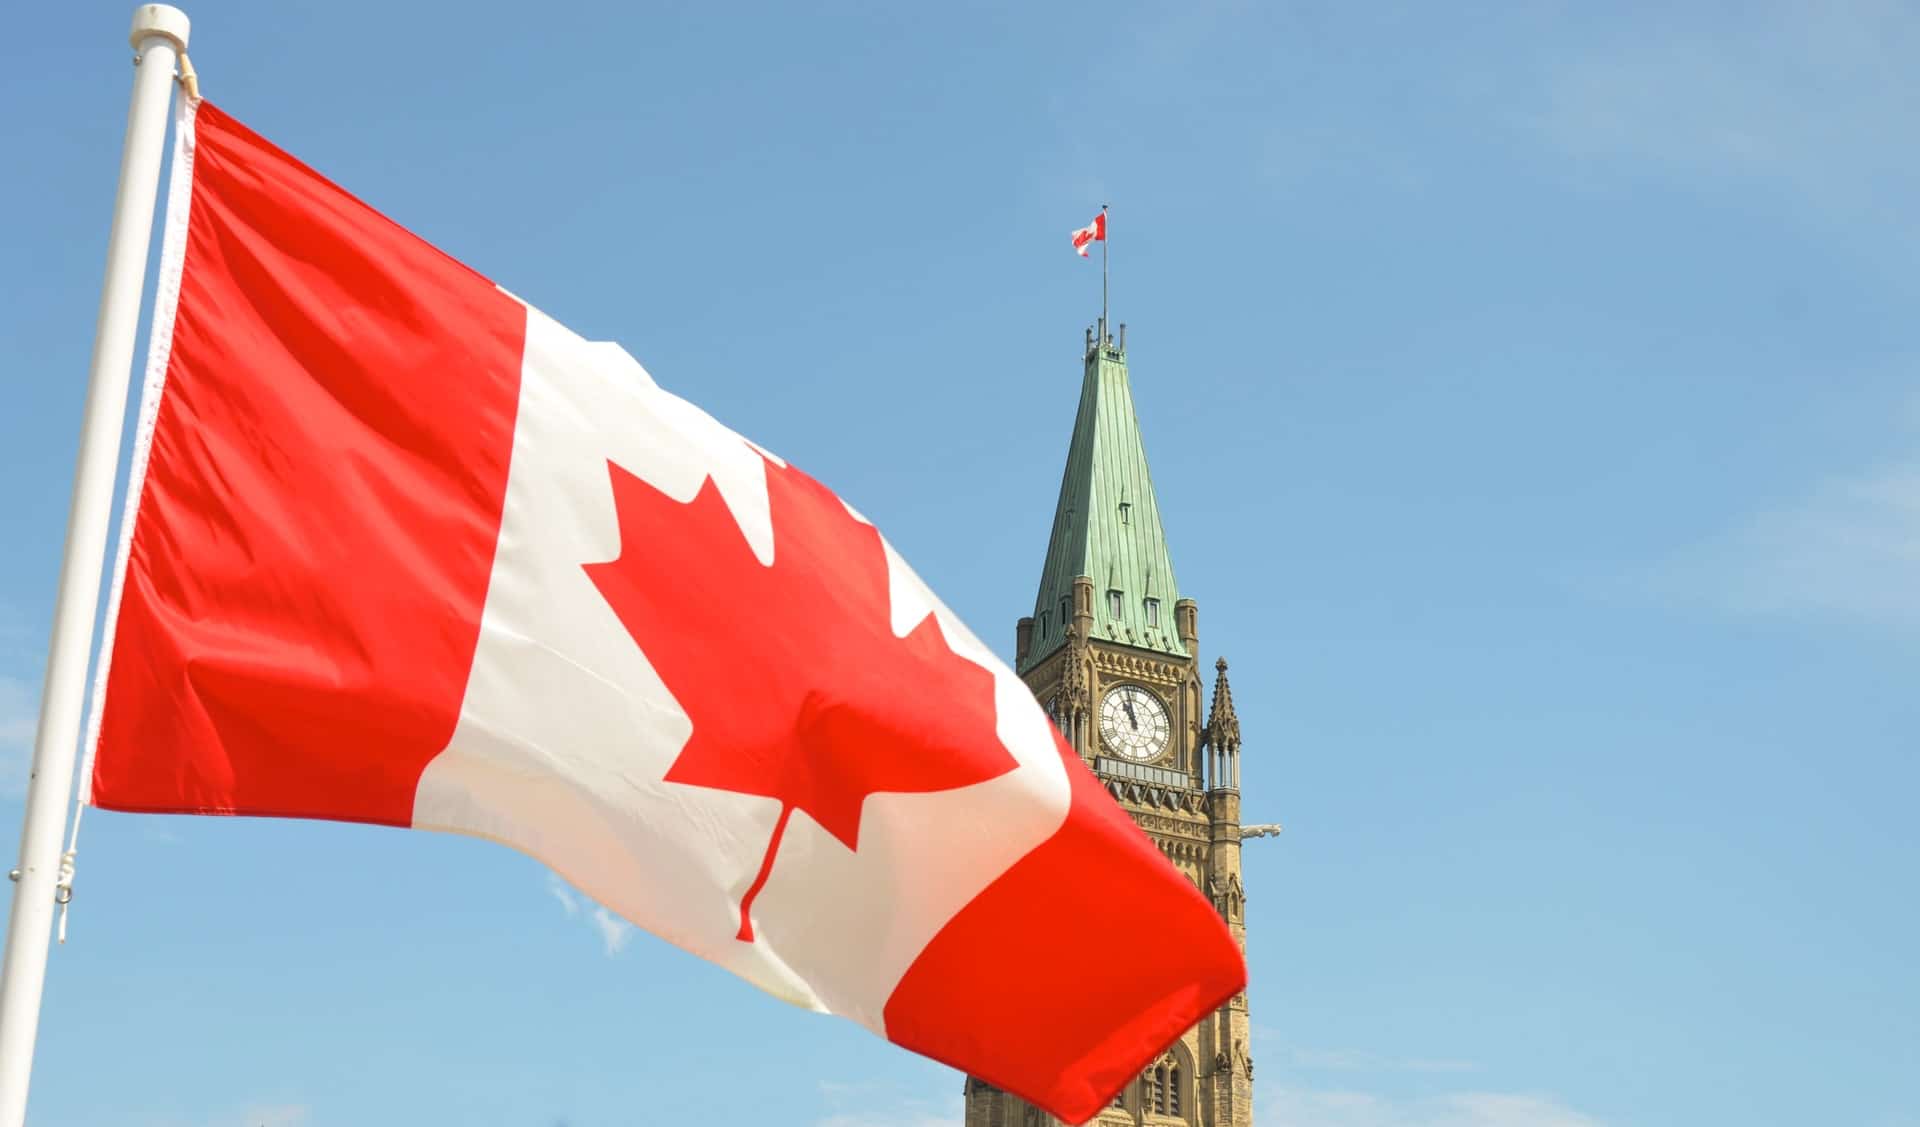 Canadian flag and Parliament